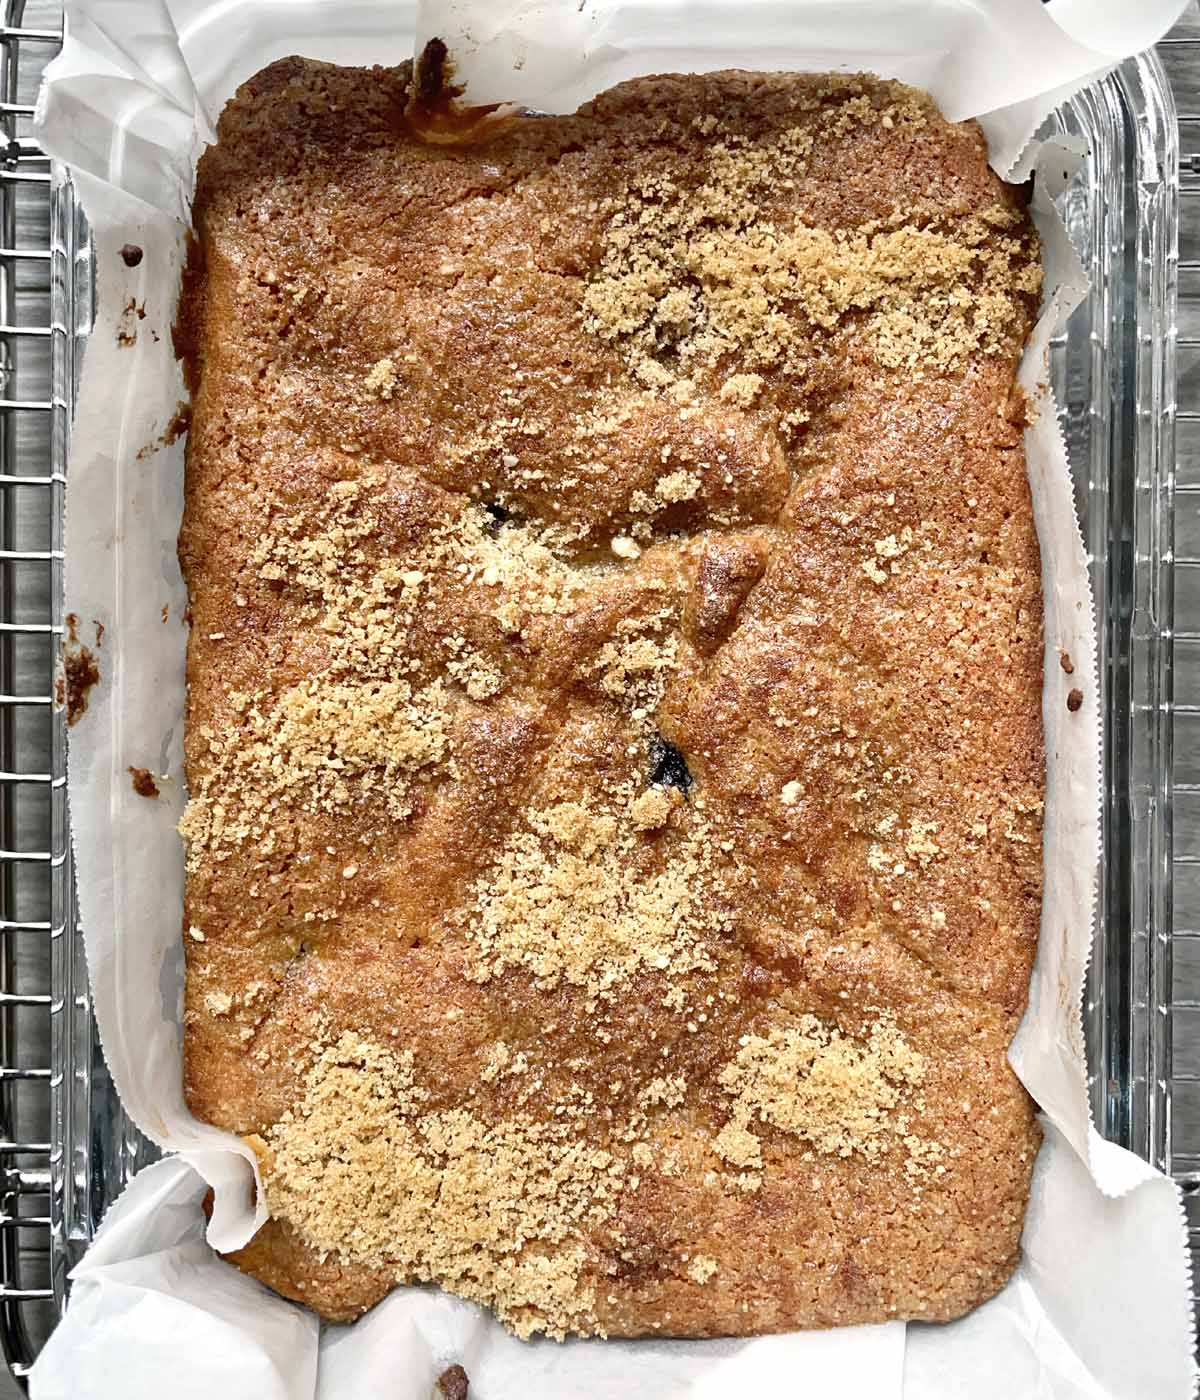 Brown baked cake in a paper-lined rectangular baking dish.